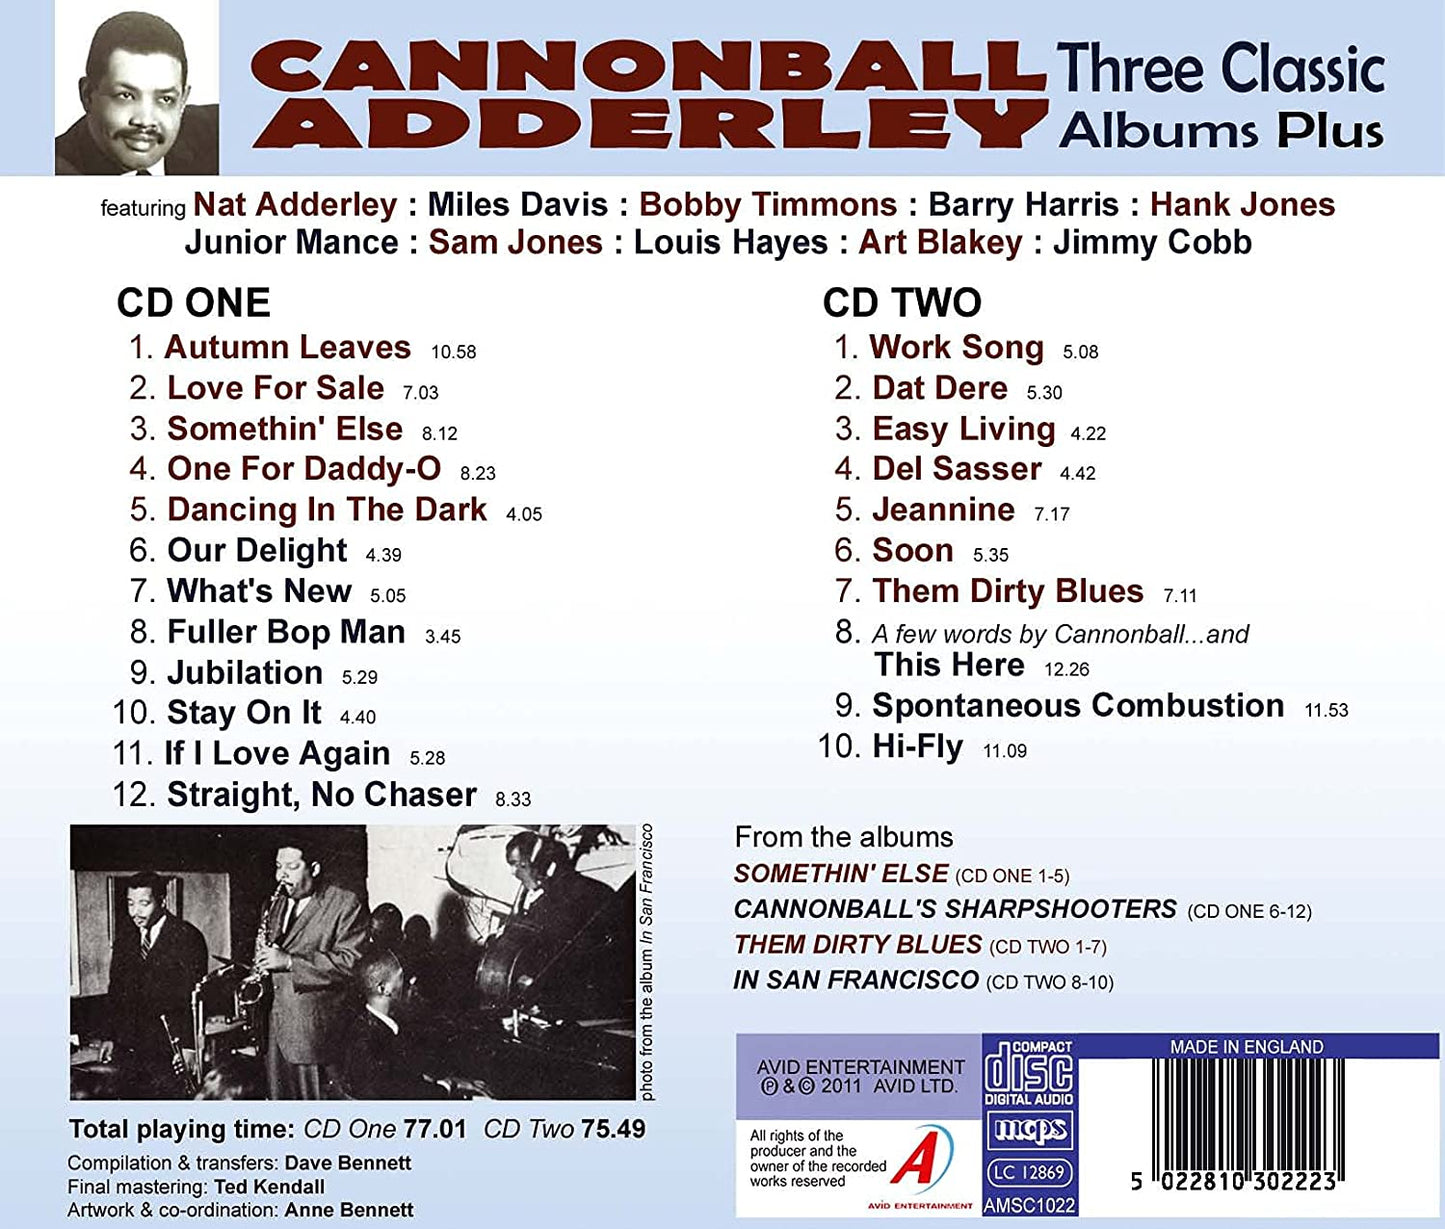 CANNONBALL ADDERLEY: THREE CLASSIC ALBUMS PLUS (SOMETHIN’ ELSE / CANNONBALL’S SHARPSHOOTERS / THEM DIRTY BLUES) (2 CD)